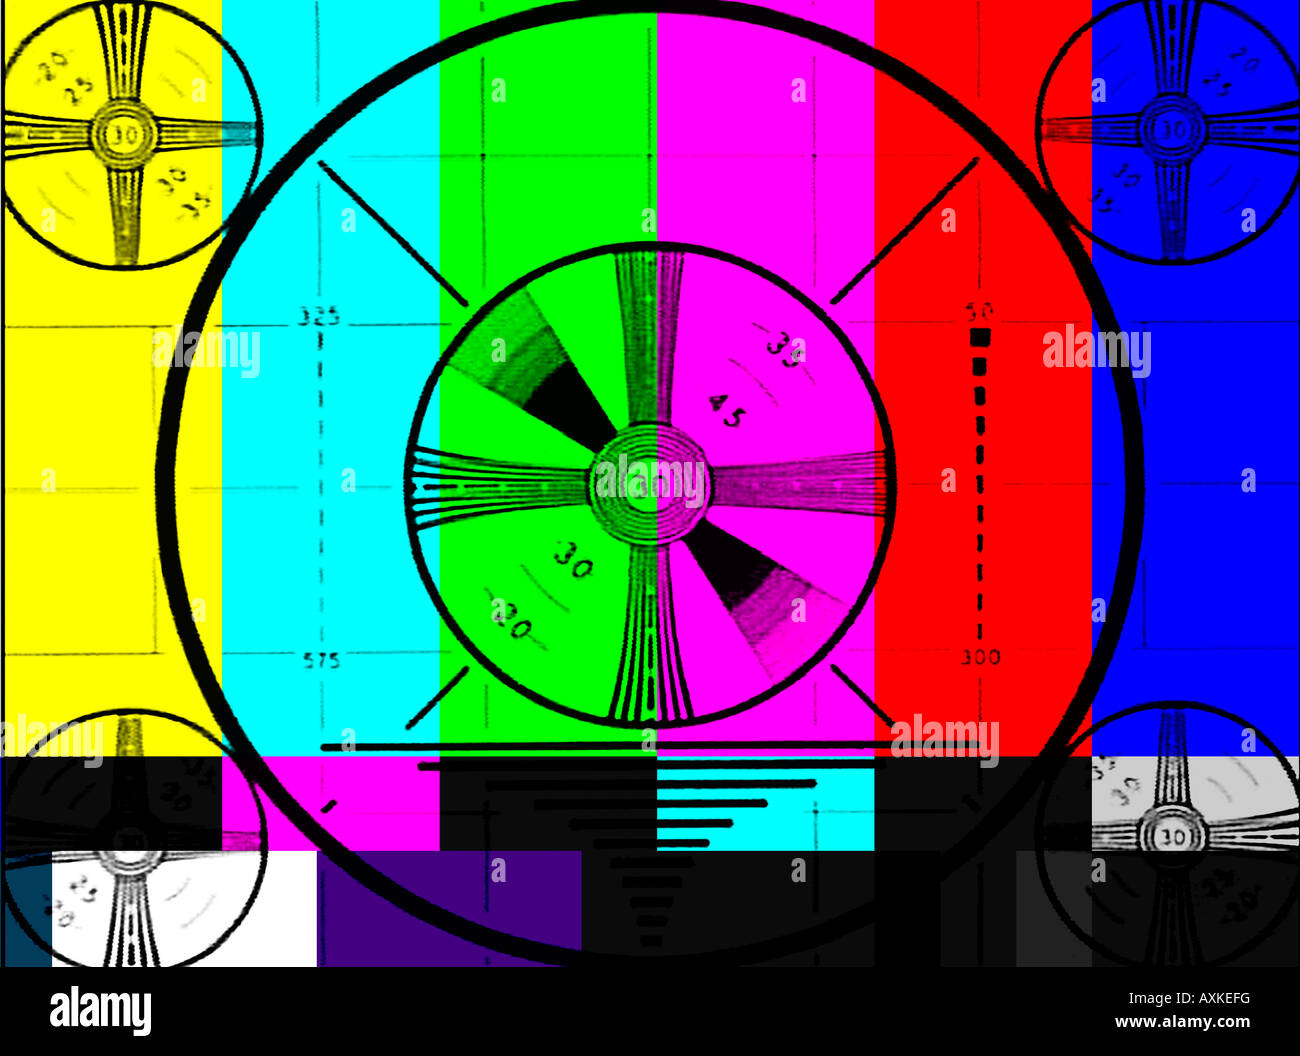 television test pattern super imposed on color bars Stock Photo